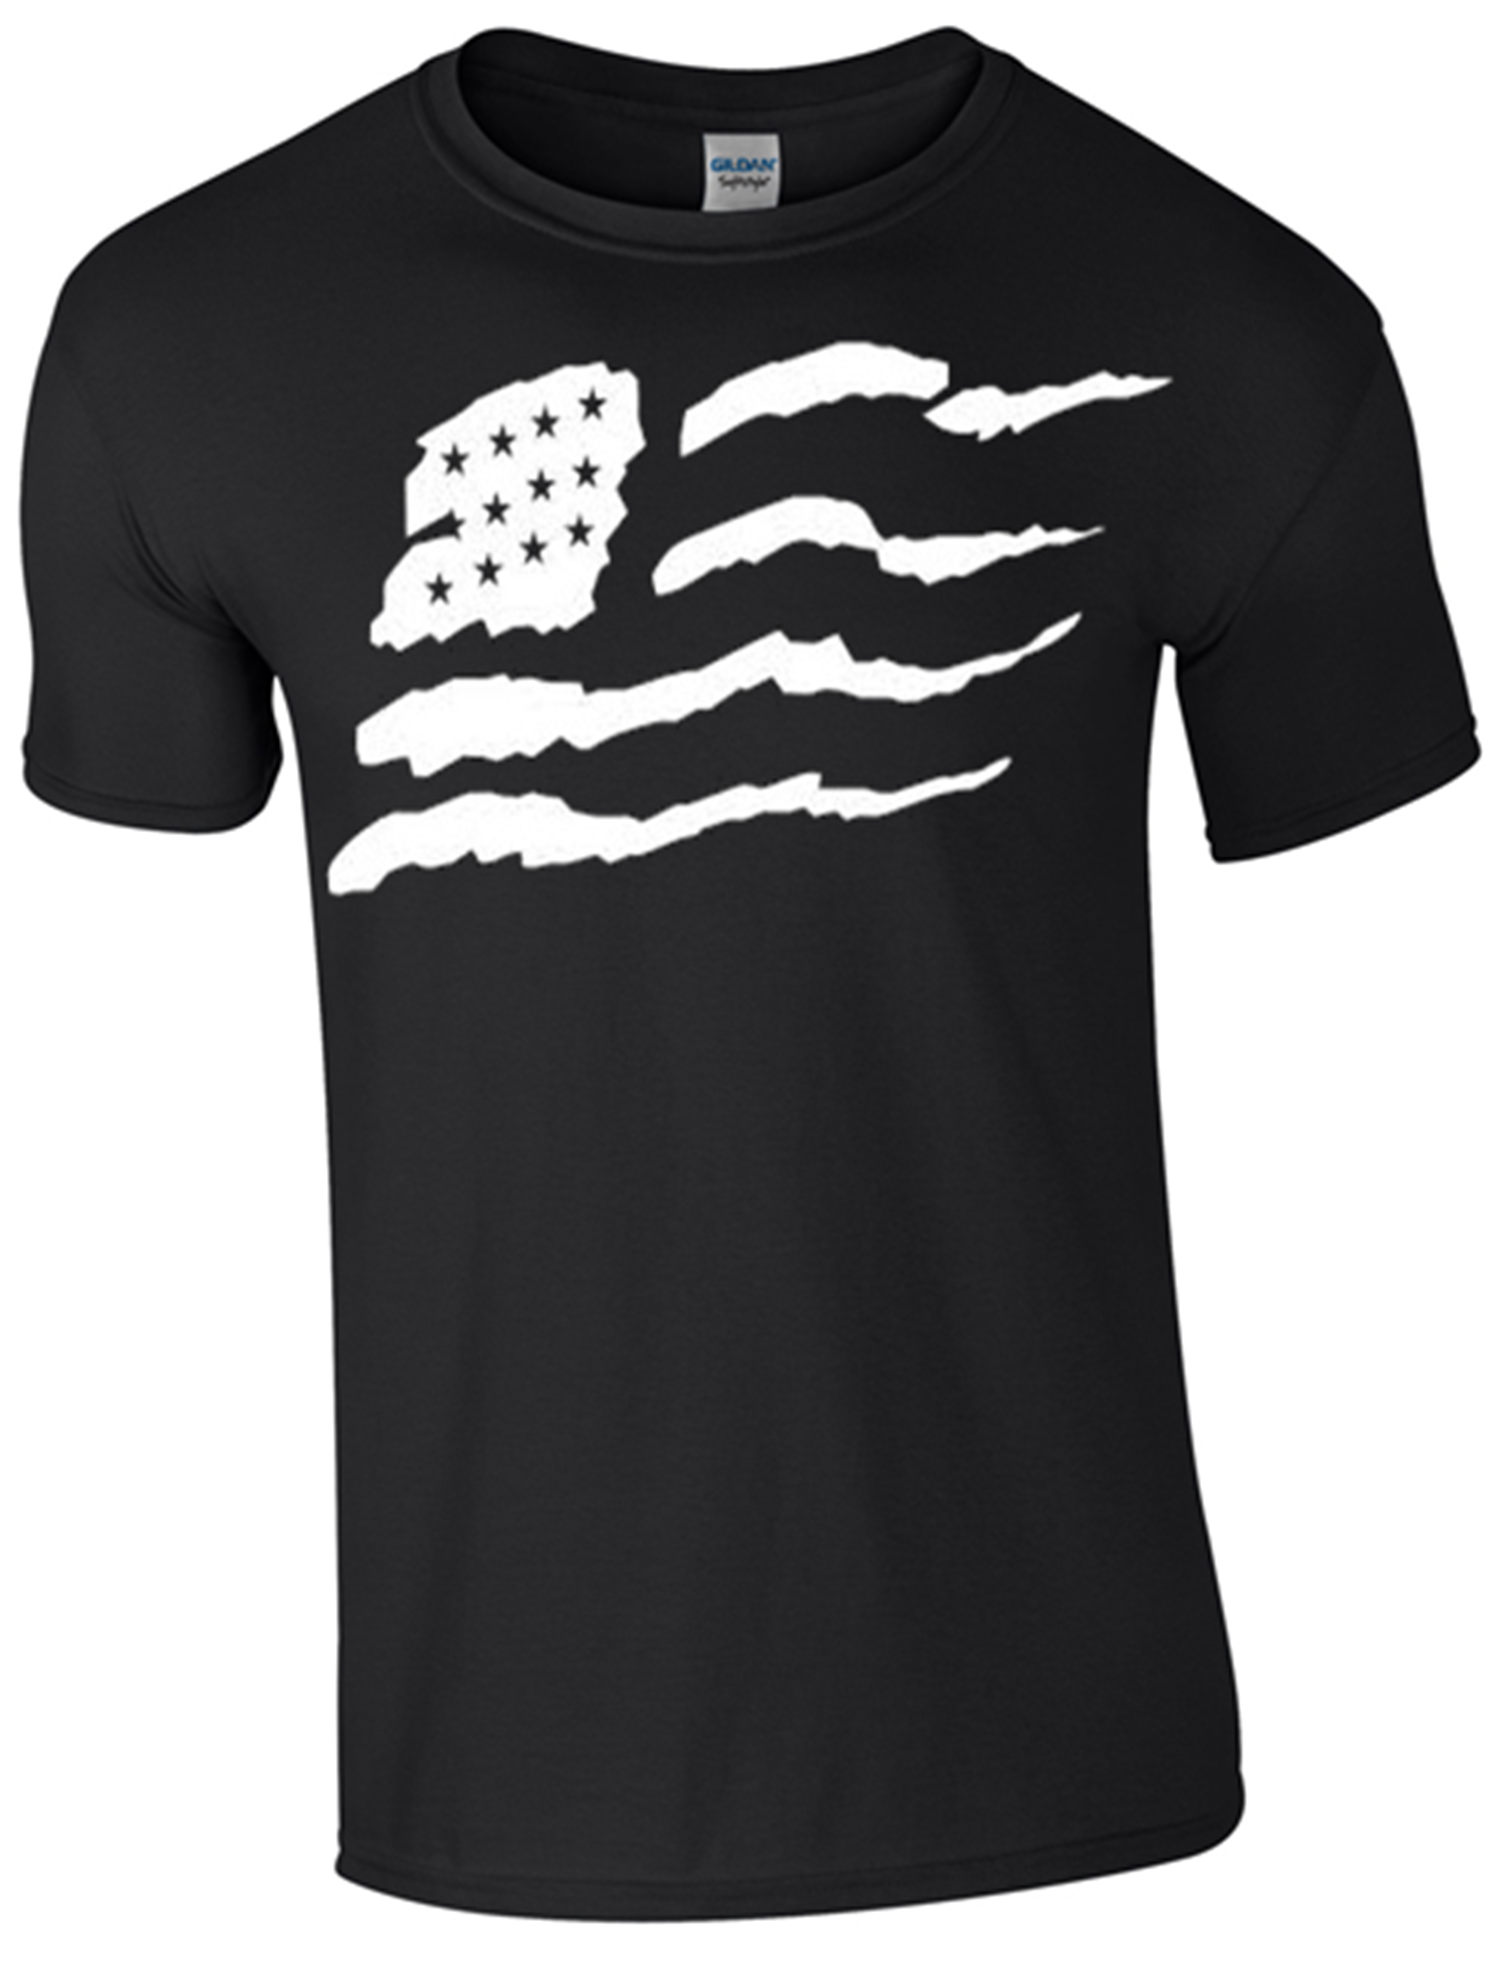 Stars & Stripes T-Shirt Printed DTG (Direct to Garment) for a Permanent Finish. - Army 1157 kit S / Black Army 1157 Kit Veterans Owned Business